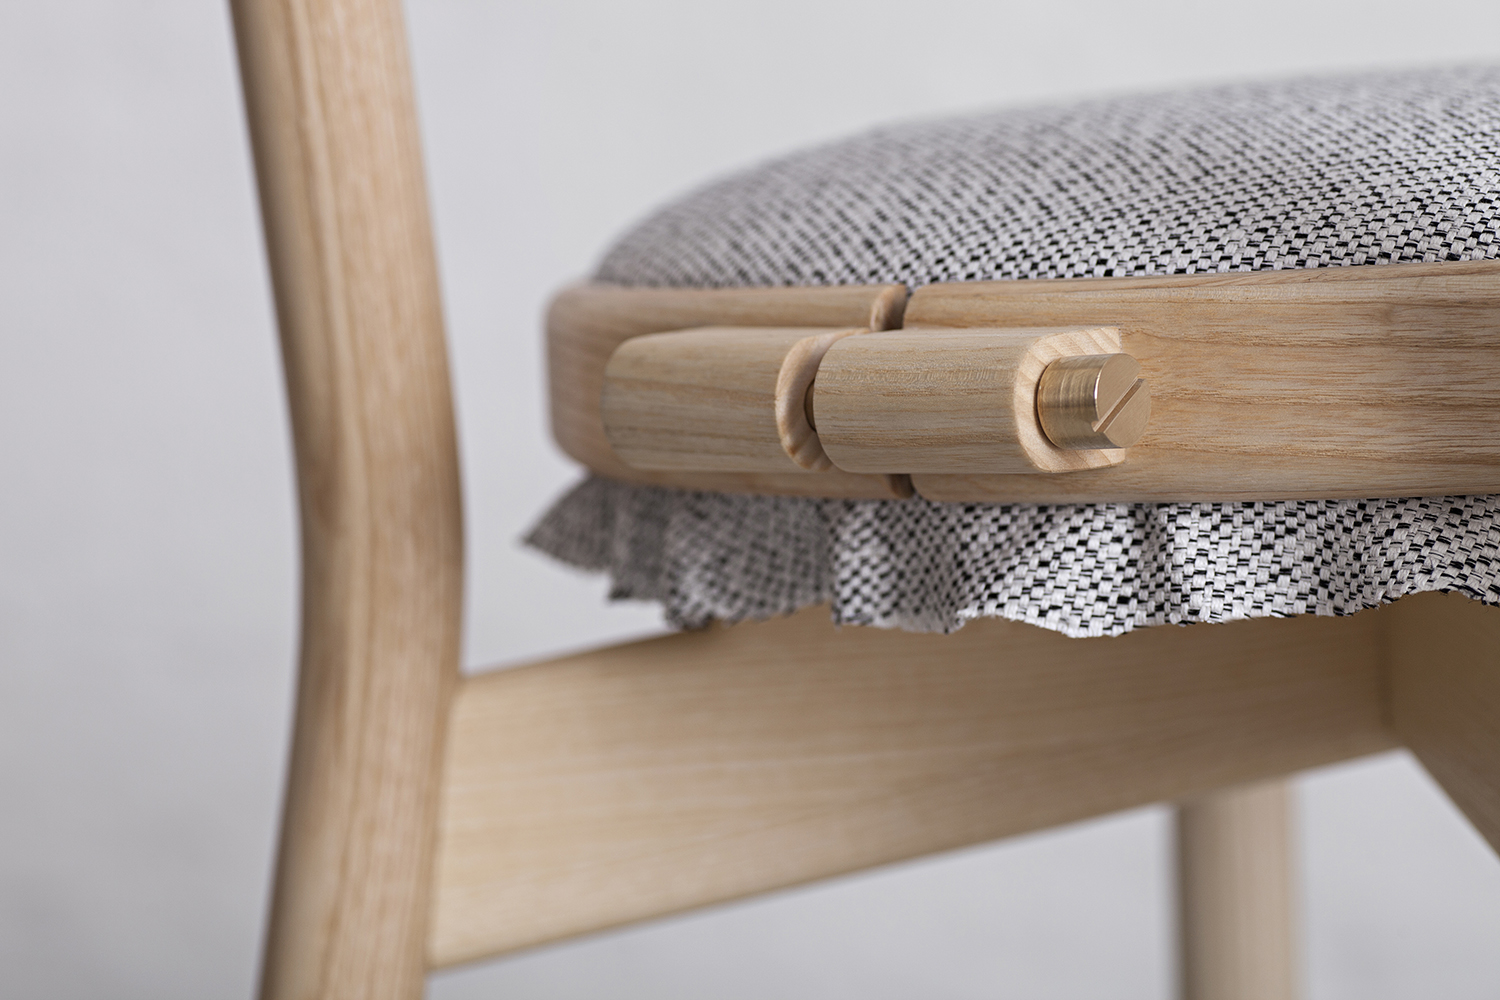 Canvas Chair by Stoft Studio